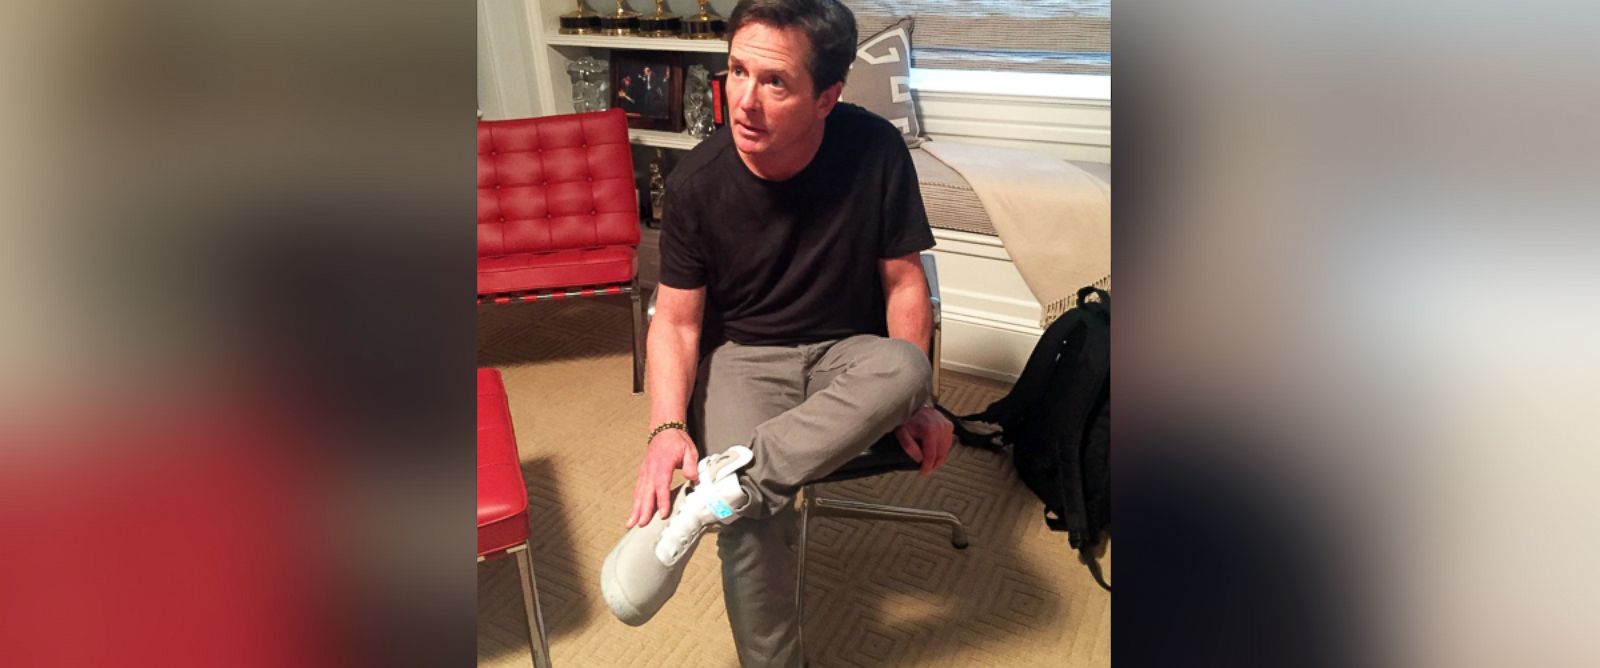 PHOTO: The MIchael J Fox Foundation shared this image to their Twitter, Oct. 21, 2015, of MIchael J. Fox trying on similar Nike sneakers from the movie "back to the Future Part II" set to be released in 2016.